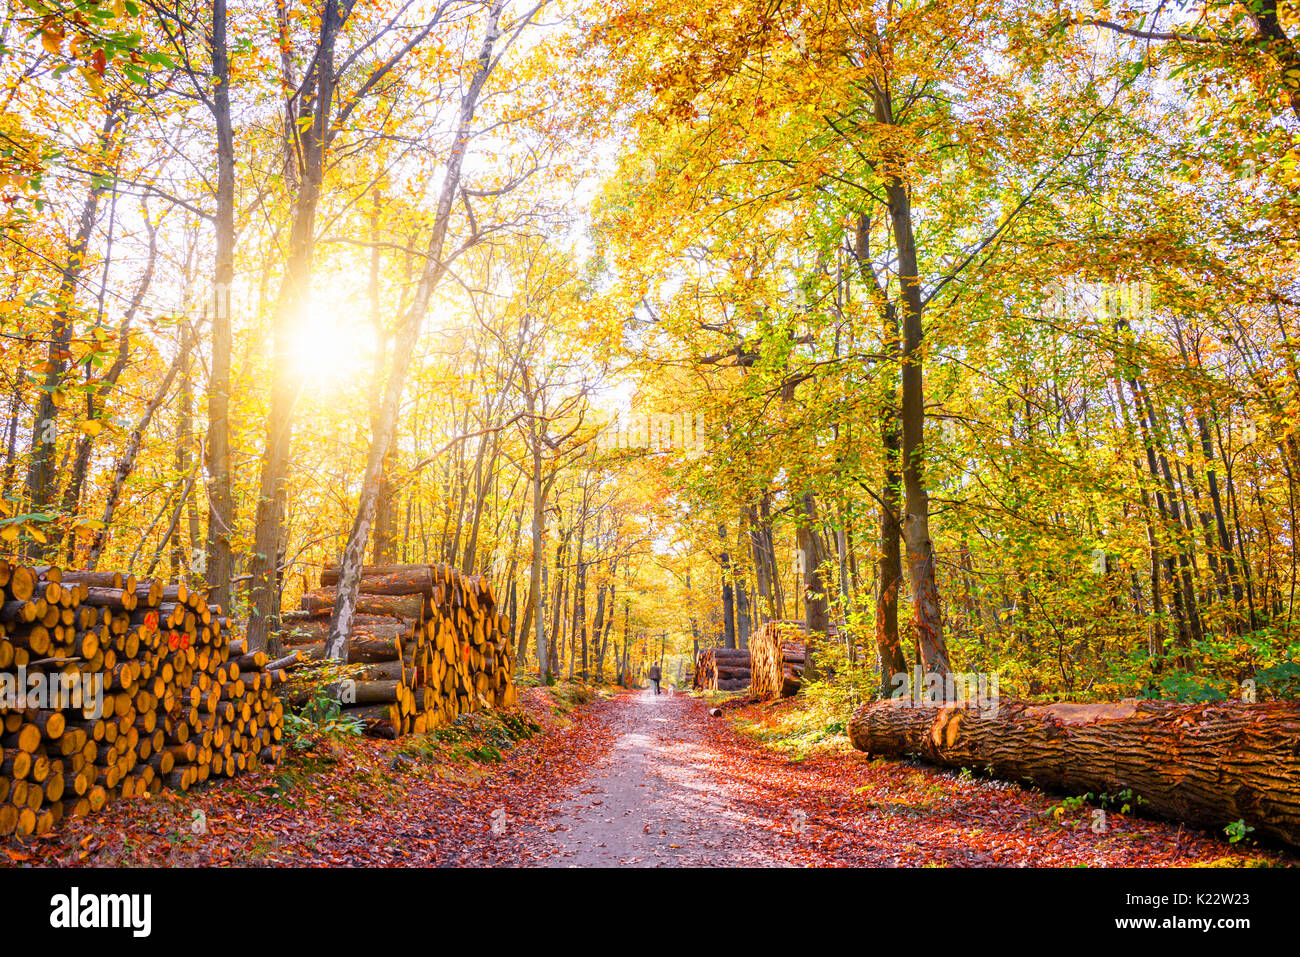 Footpath with piles of wood logs in a forest in autumn Stock Photo